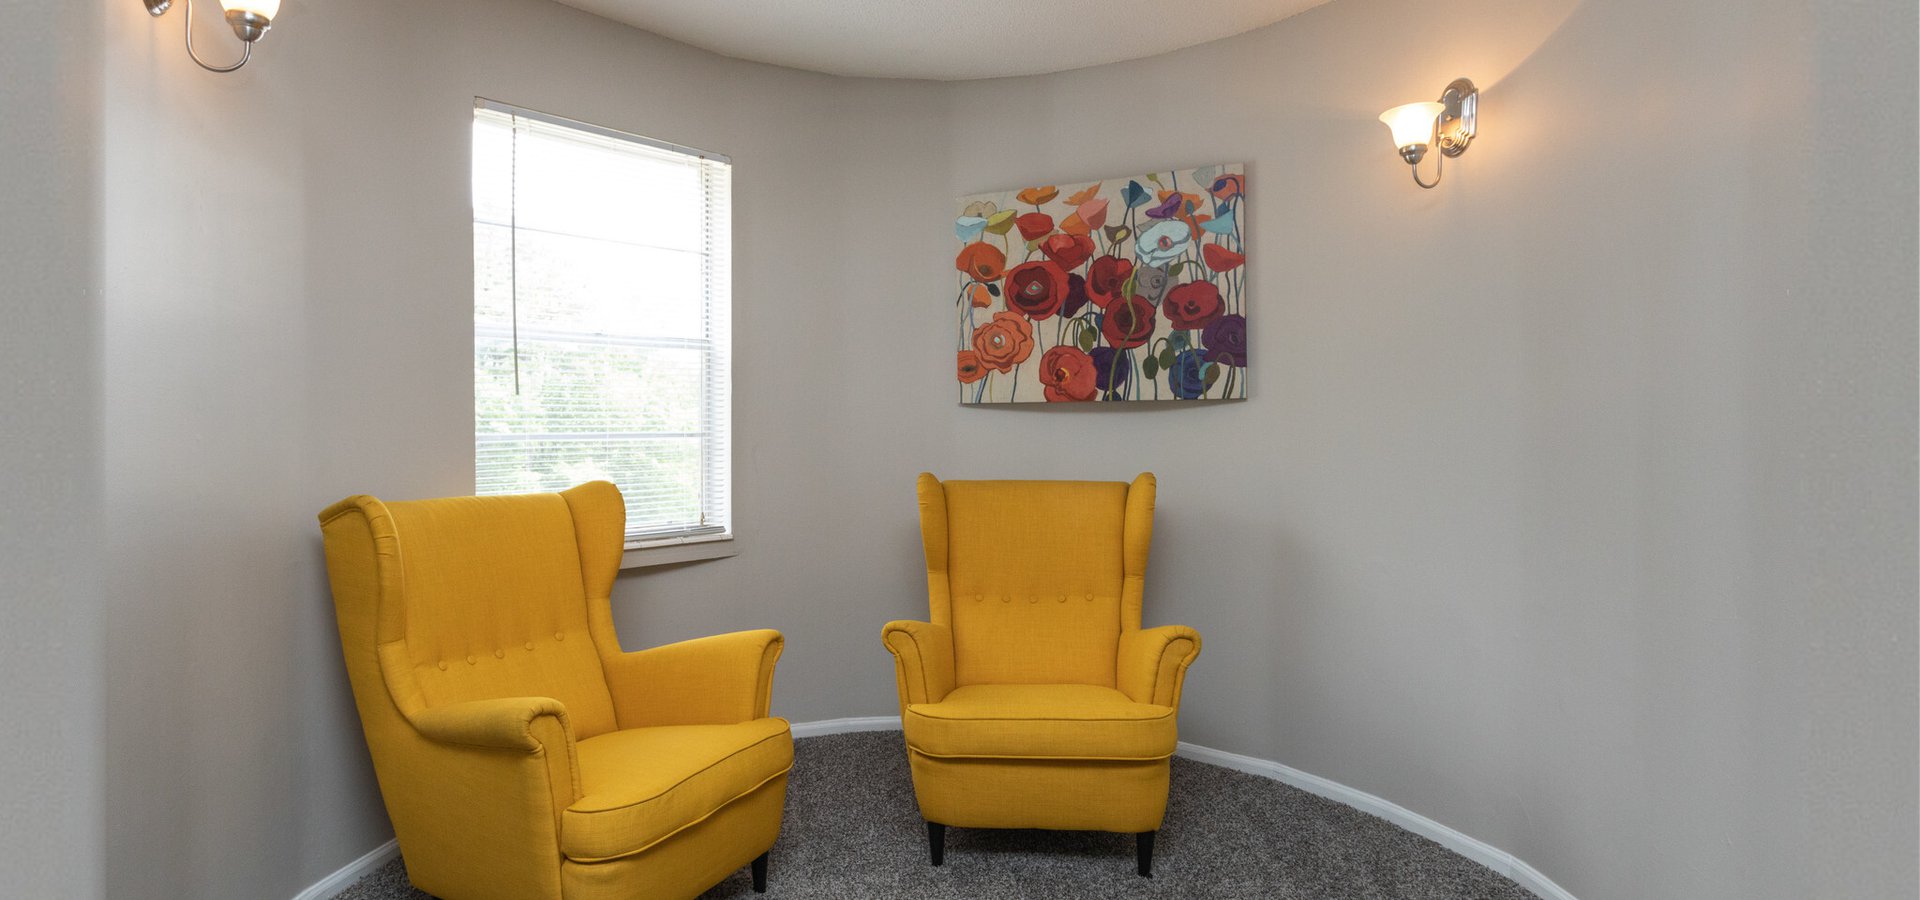 Westside Commons interior apartment. Living room with sofa, chairs and beautiful canvas paintings